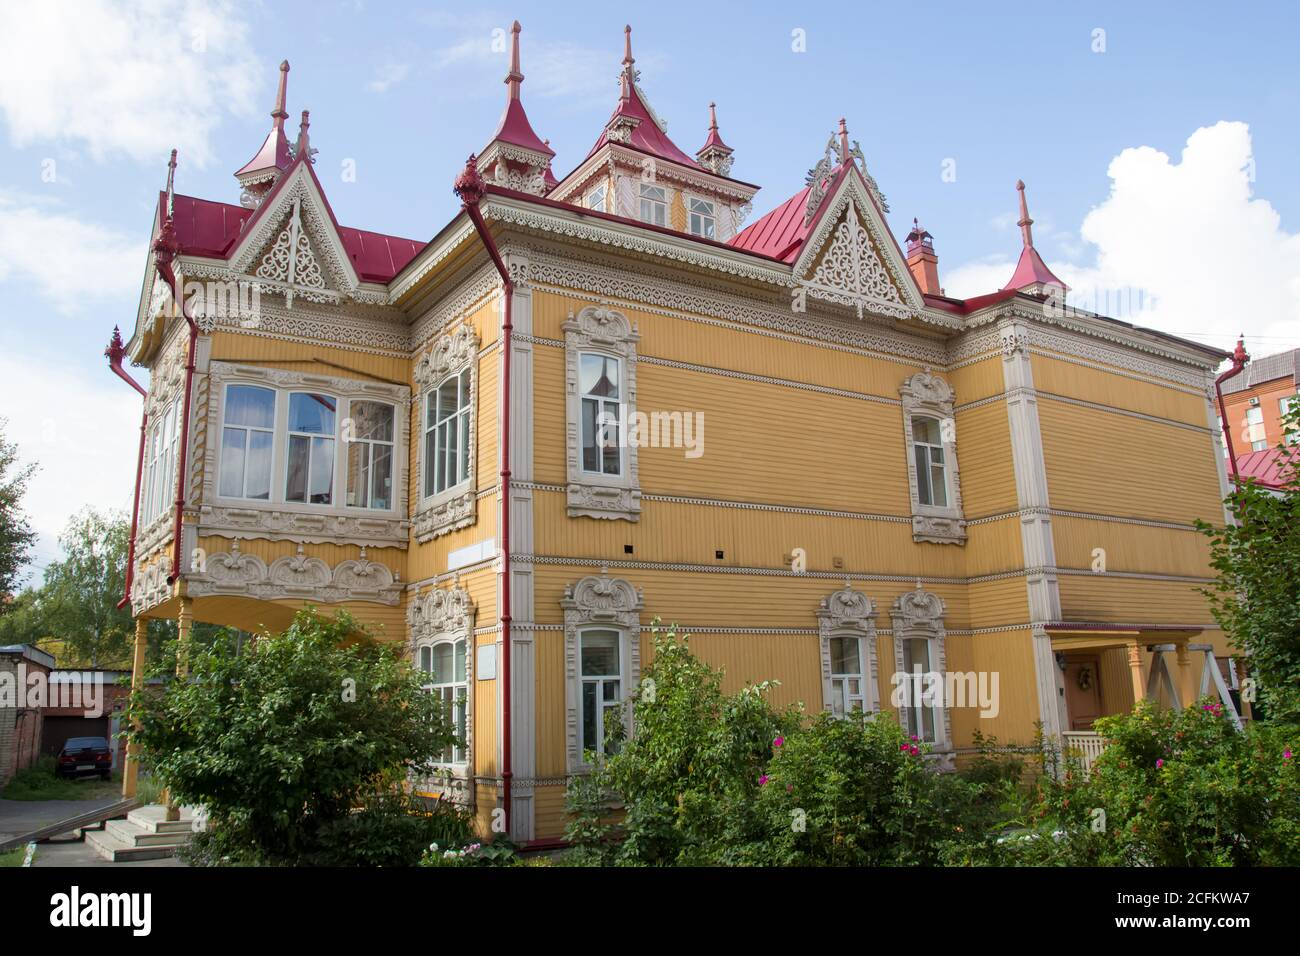 Russian style in architecture. House with firebirds, Wooden house, Tomsk, Russia. Beautiful carved elements of Russian Northern architecture Stock Photo